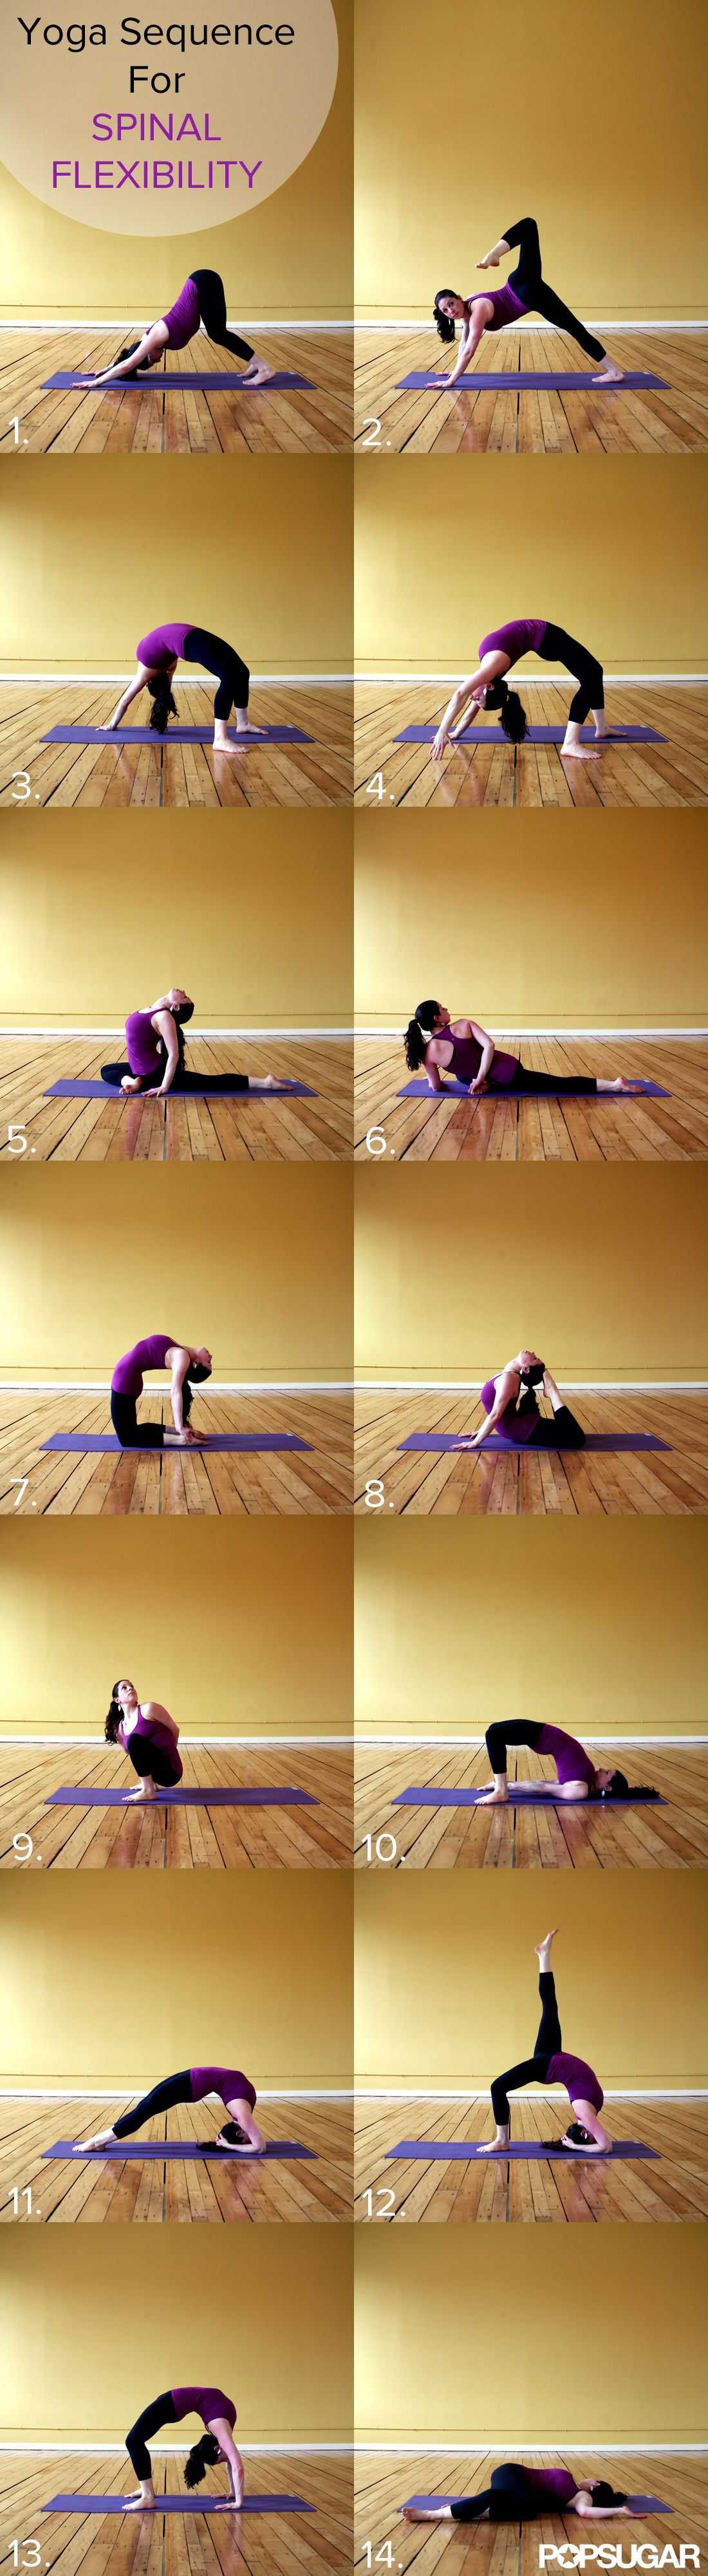 Yoga Sequence For Spinal Flexibility